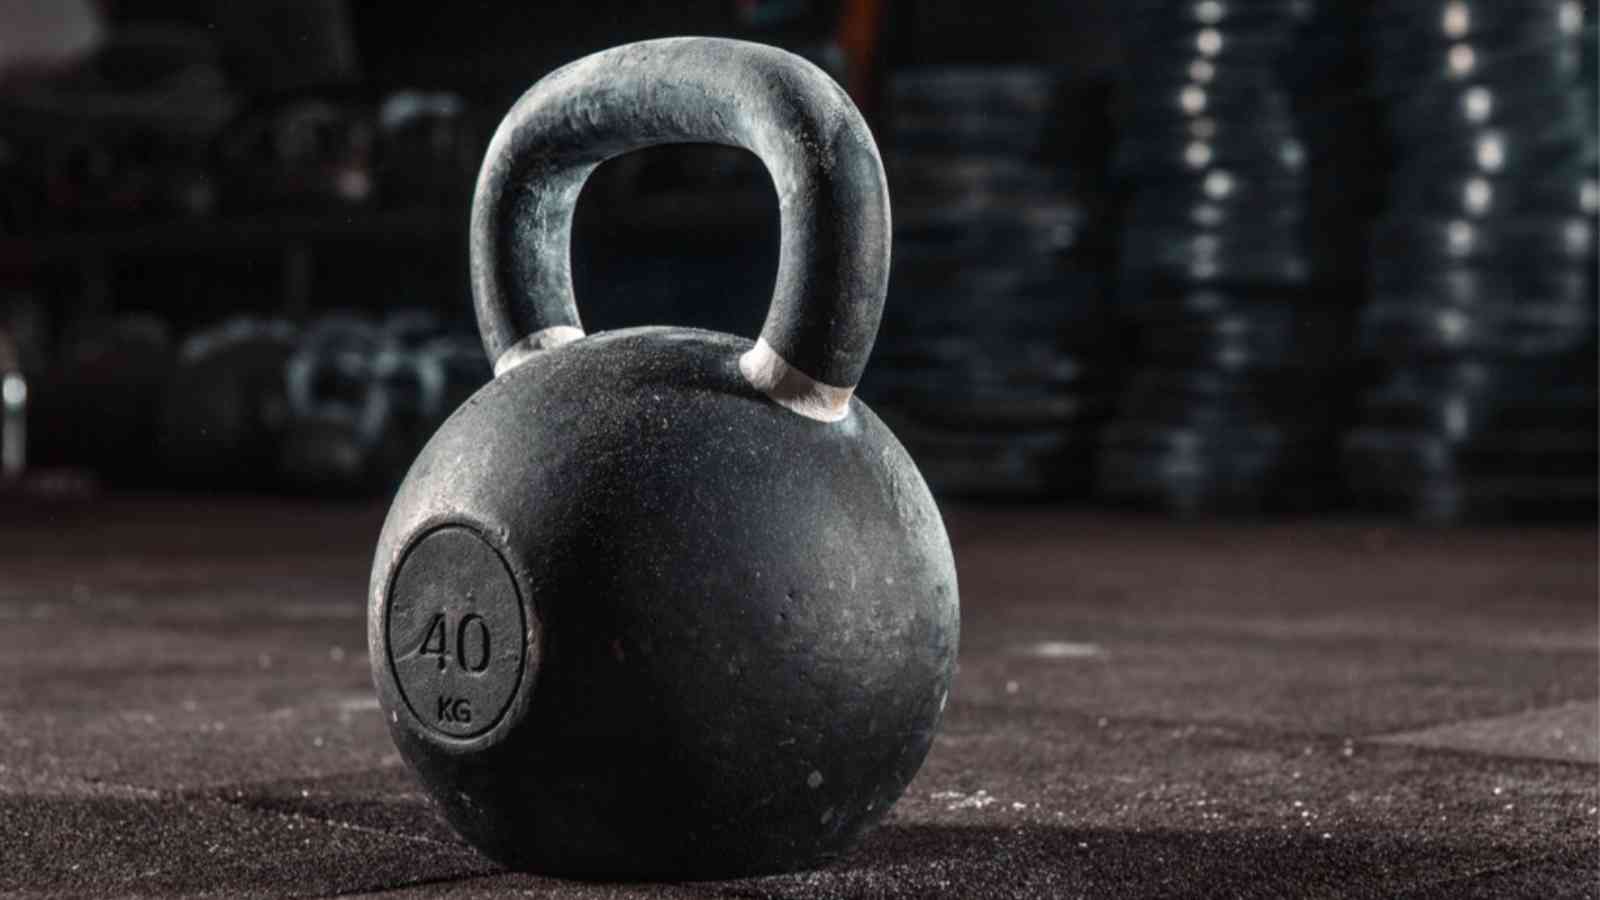 National Kettlebell Day 2023: Date, History and Origin